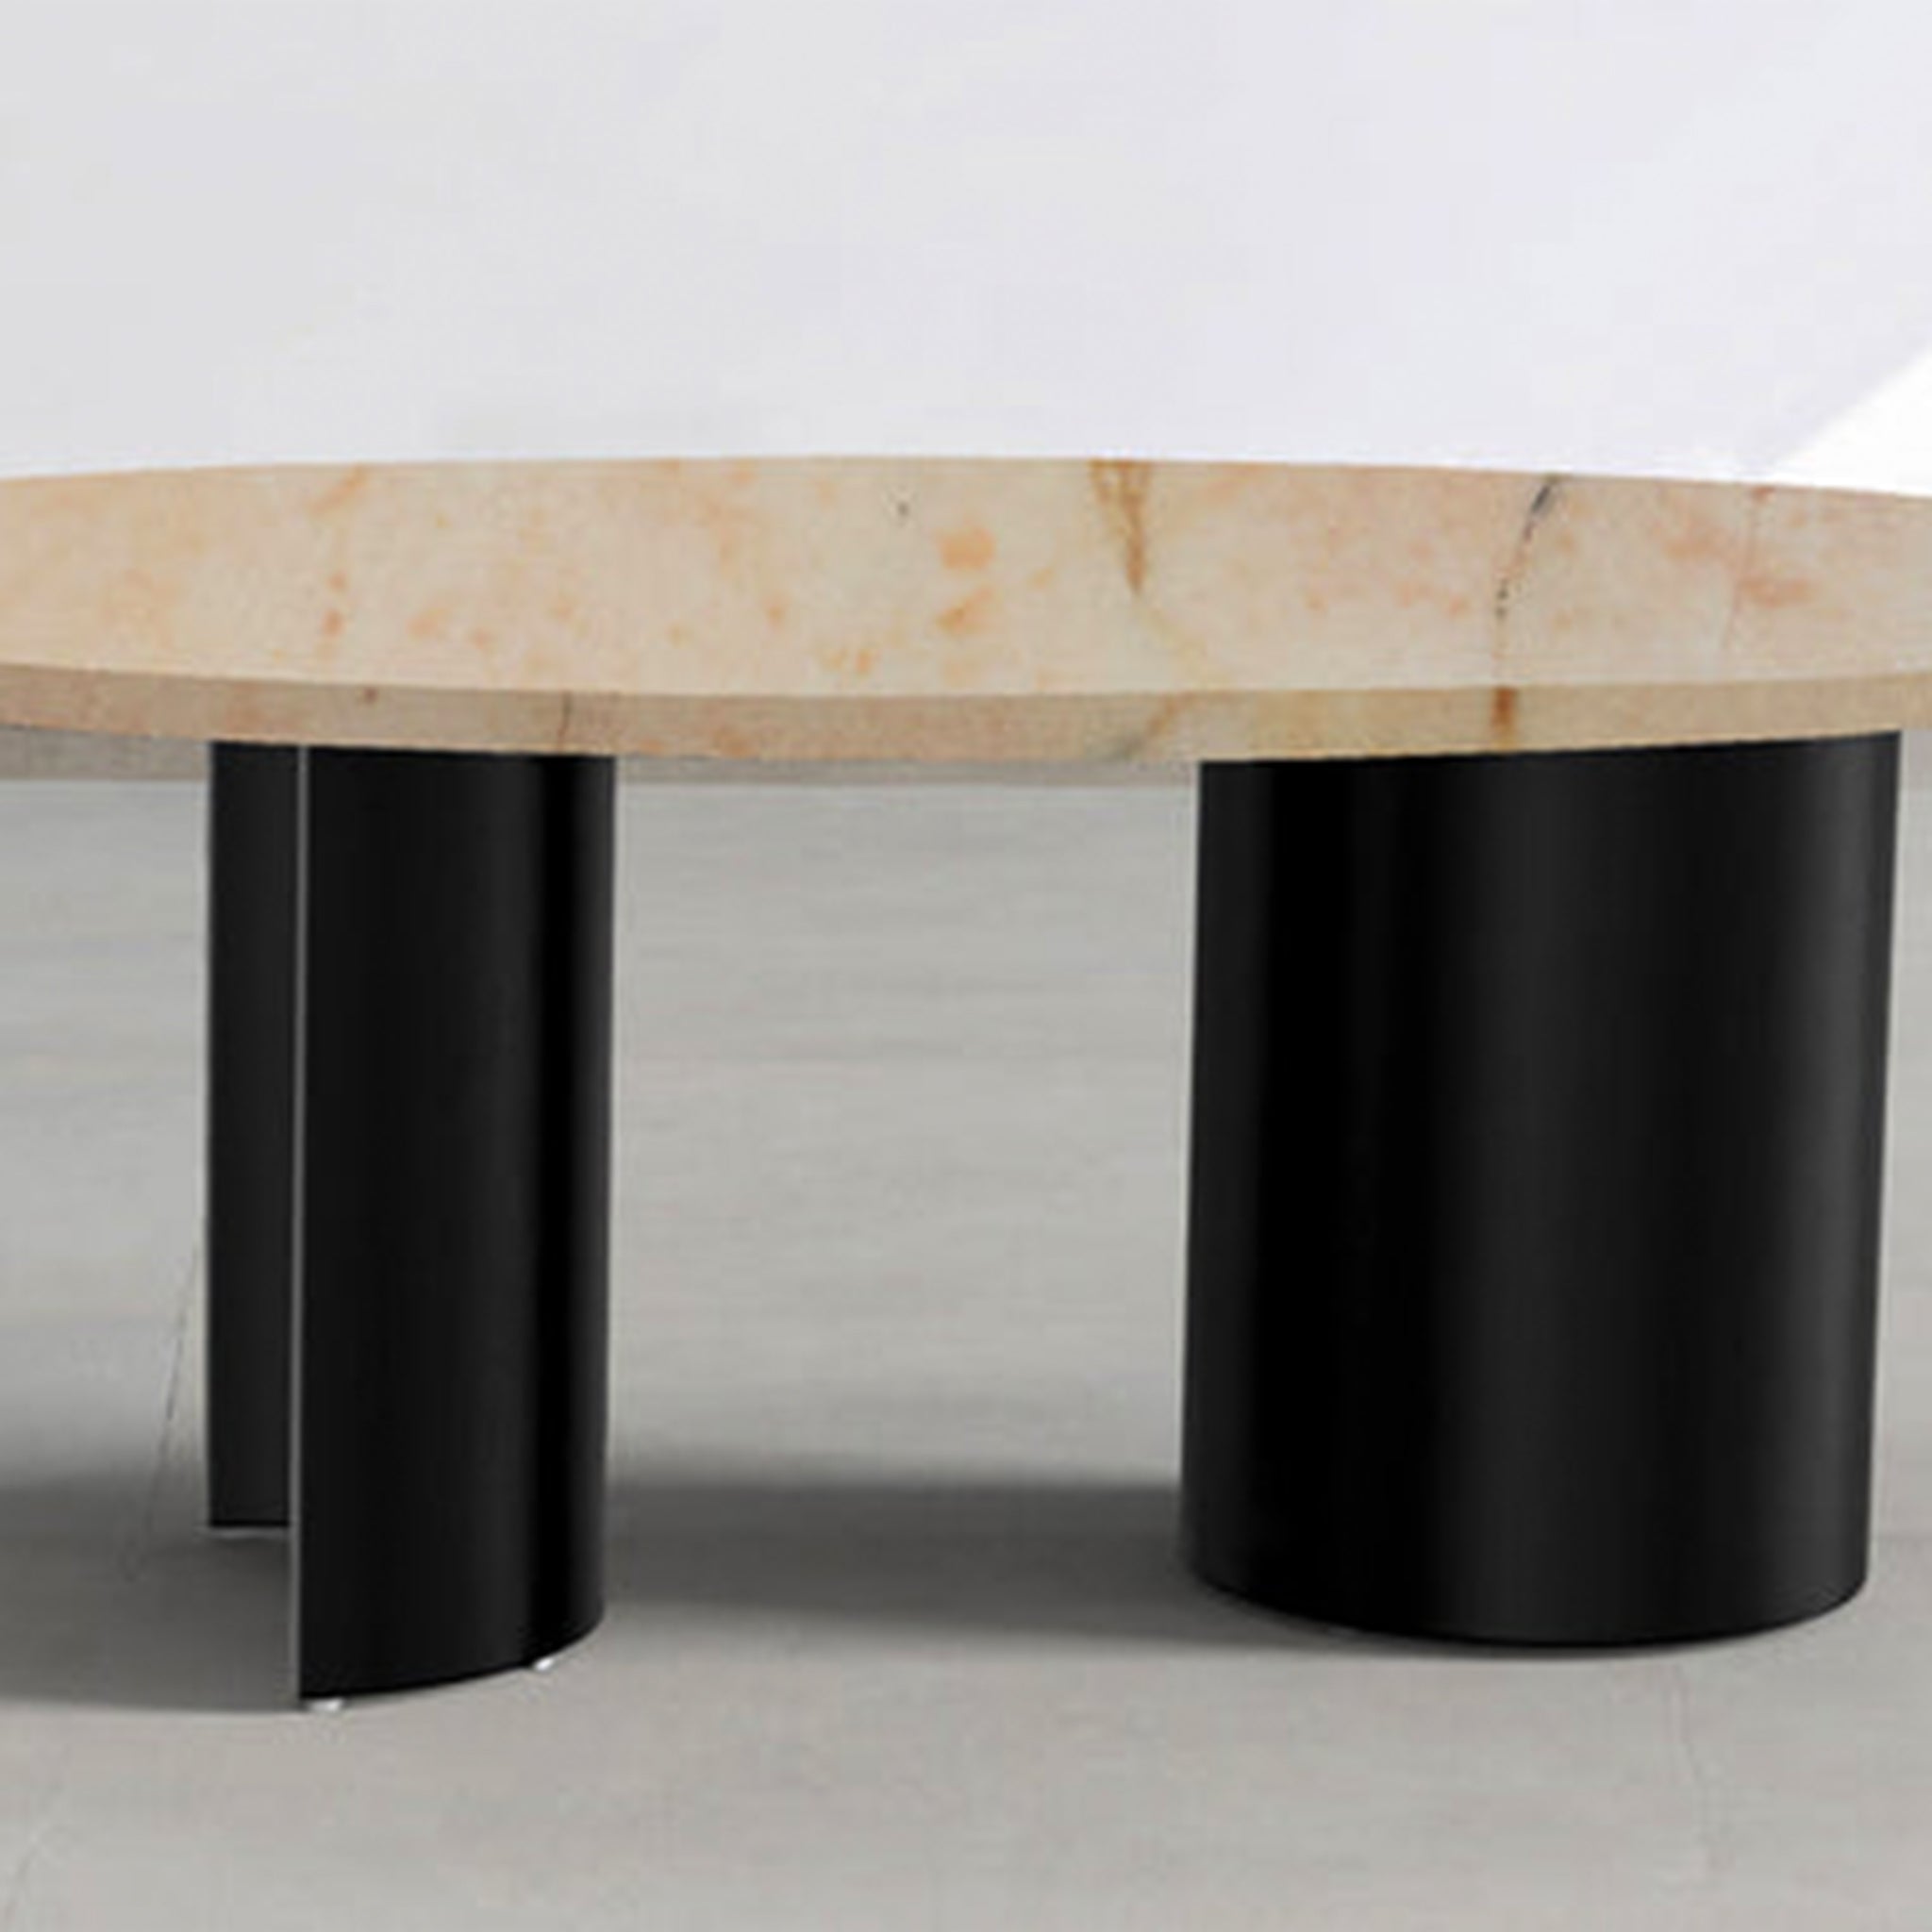 Marble Coffee Table with 2cm Edge: Provides a sleek and modern profile.